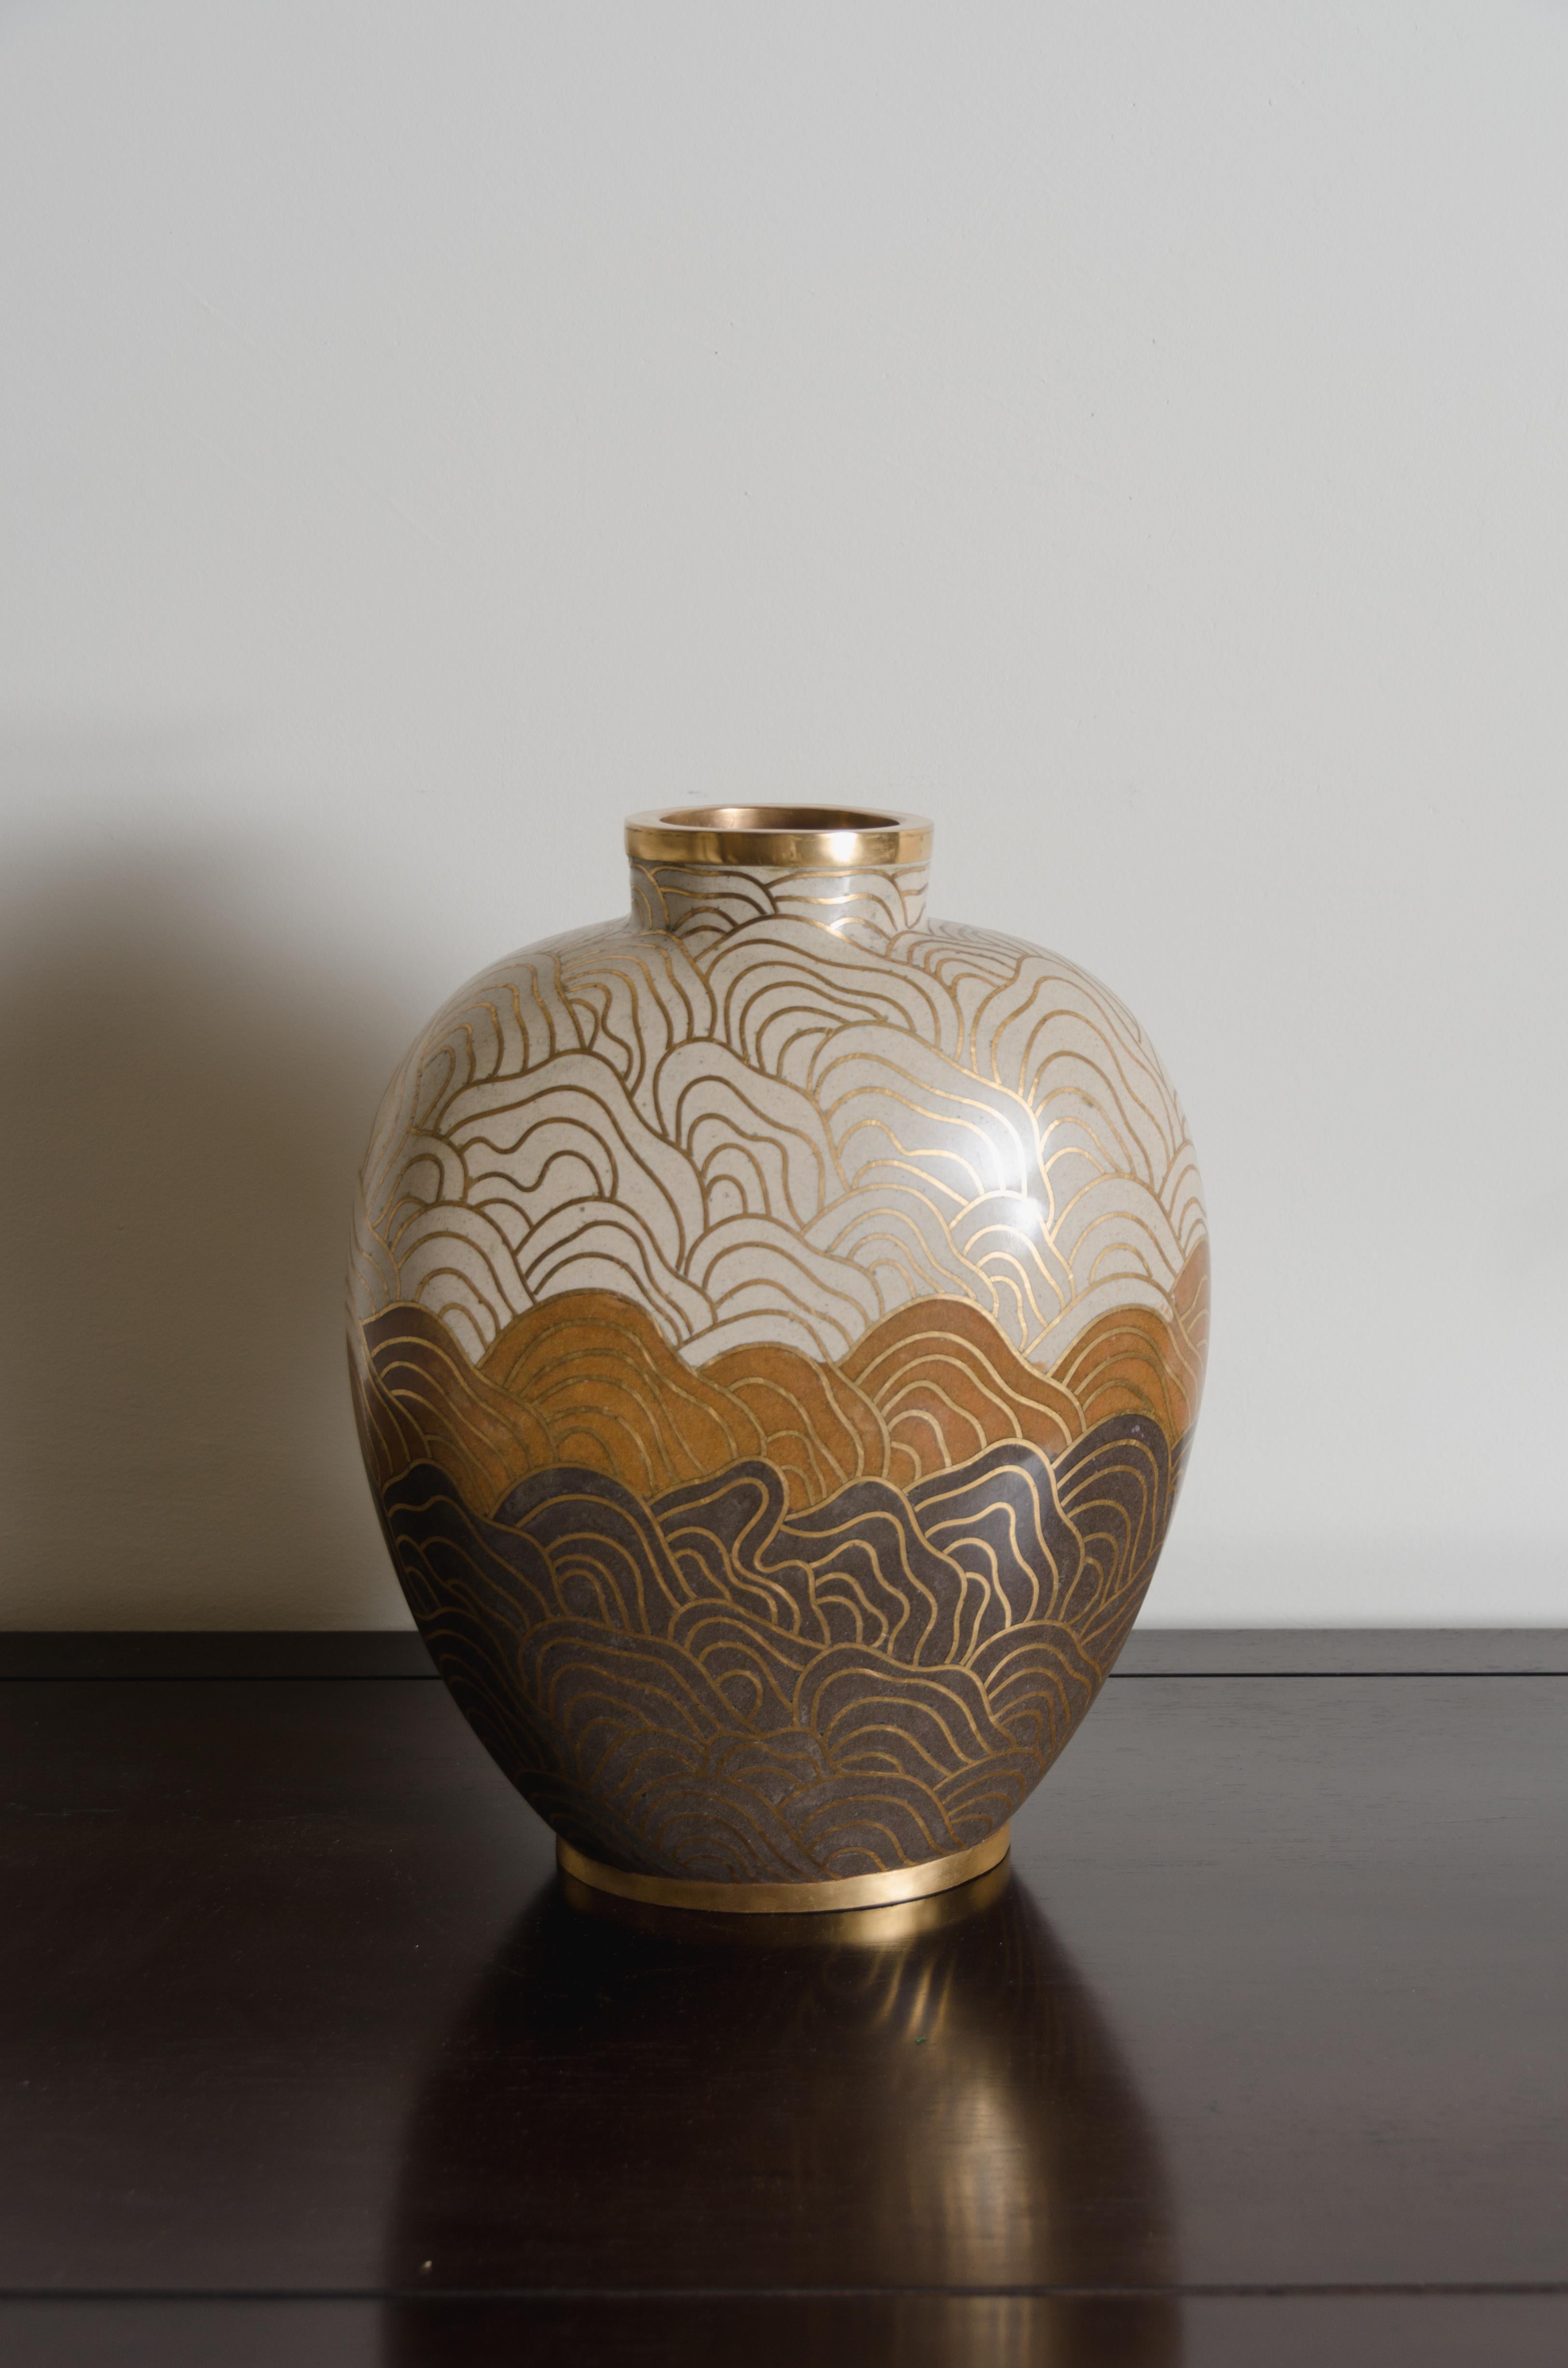 Cloissoné Snuff Vase, Shan Design, Amber by Robert Kuo, Cloisonné, Limited Edition